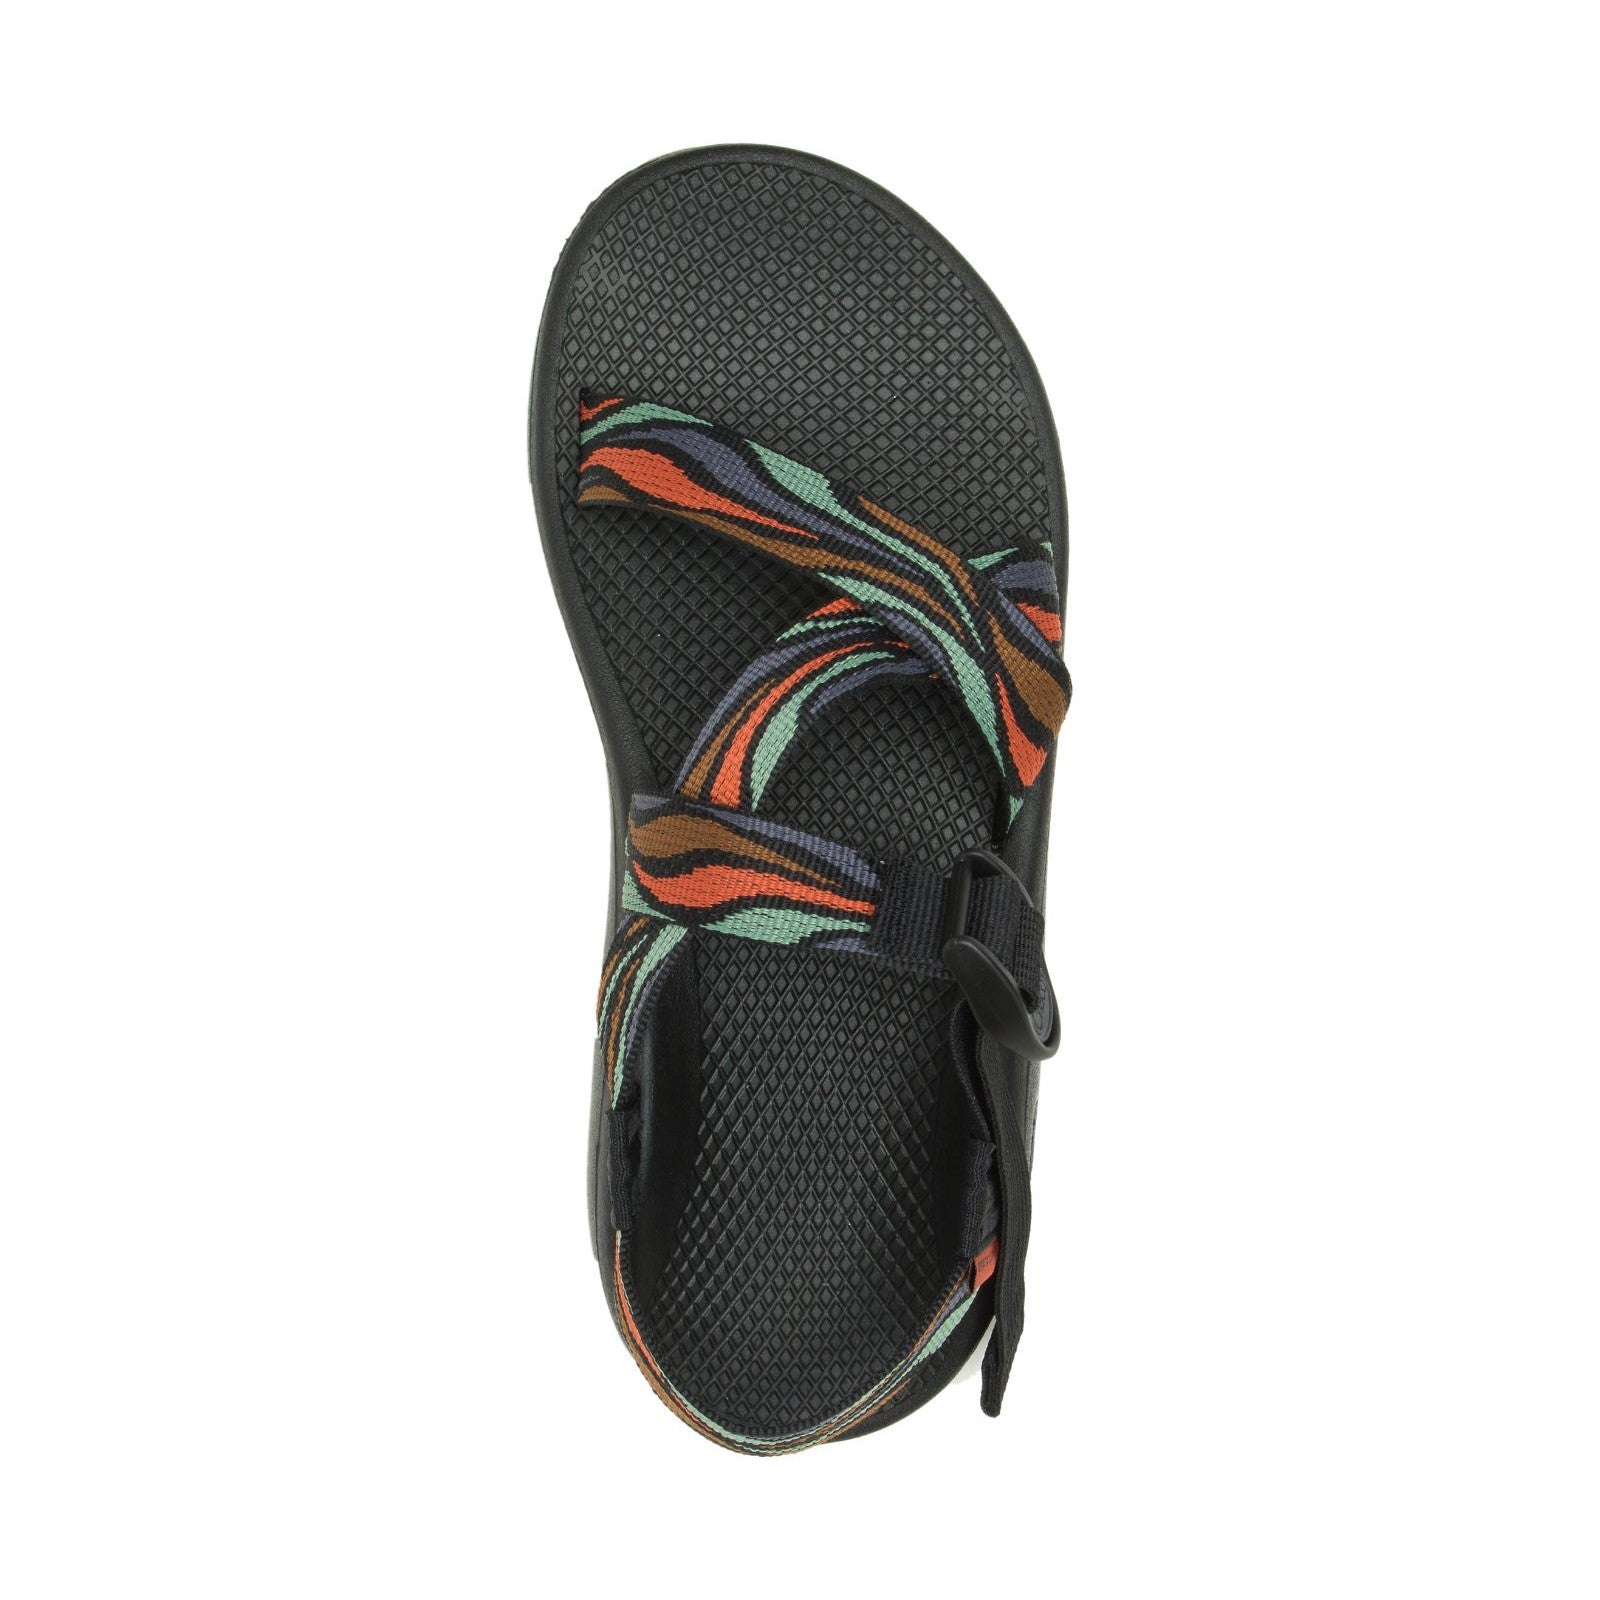 Z/1 Classic Mens Sandal - Forests, Tides, and Treasures